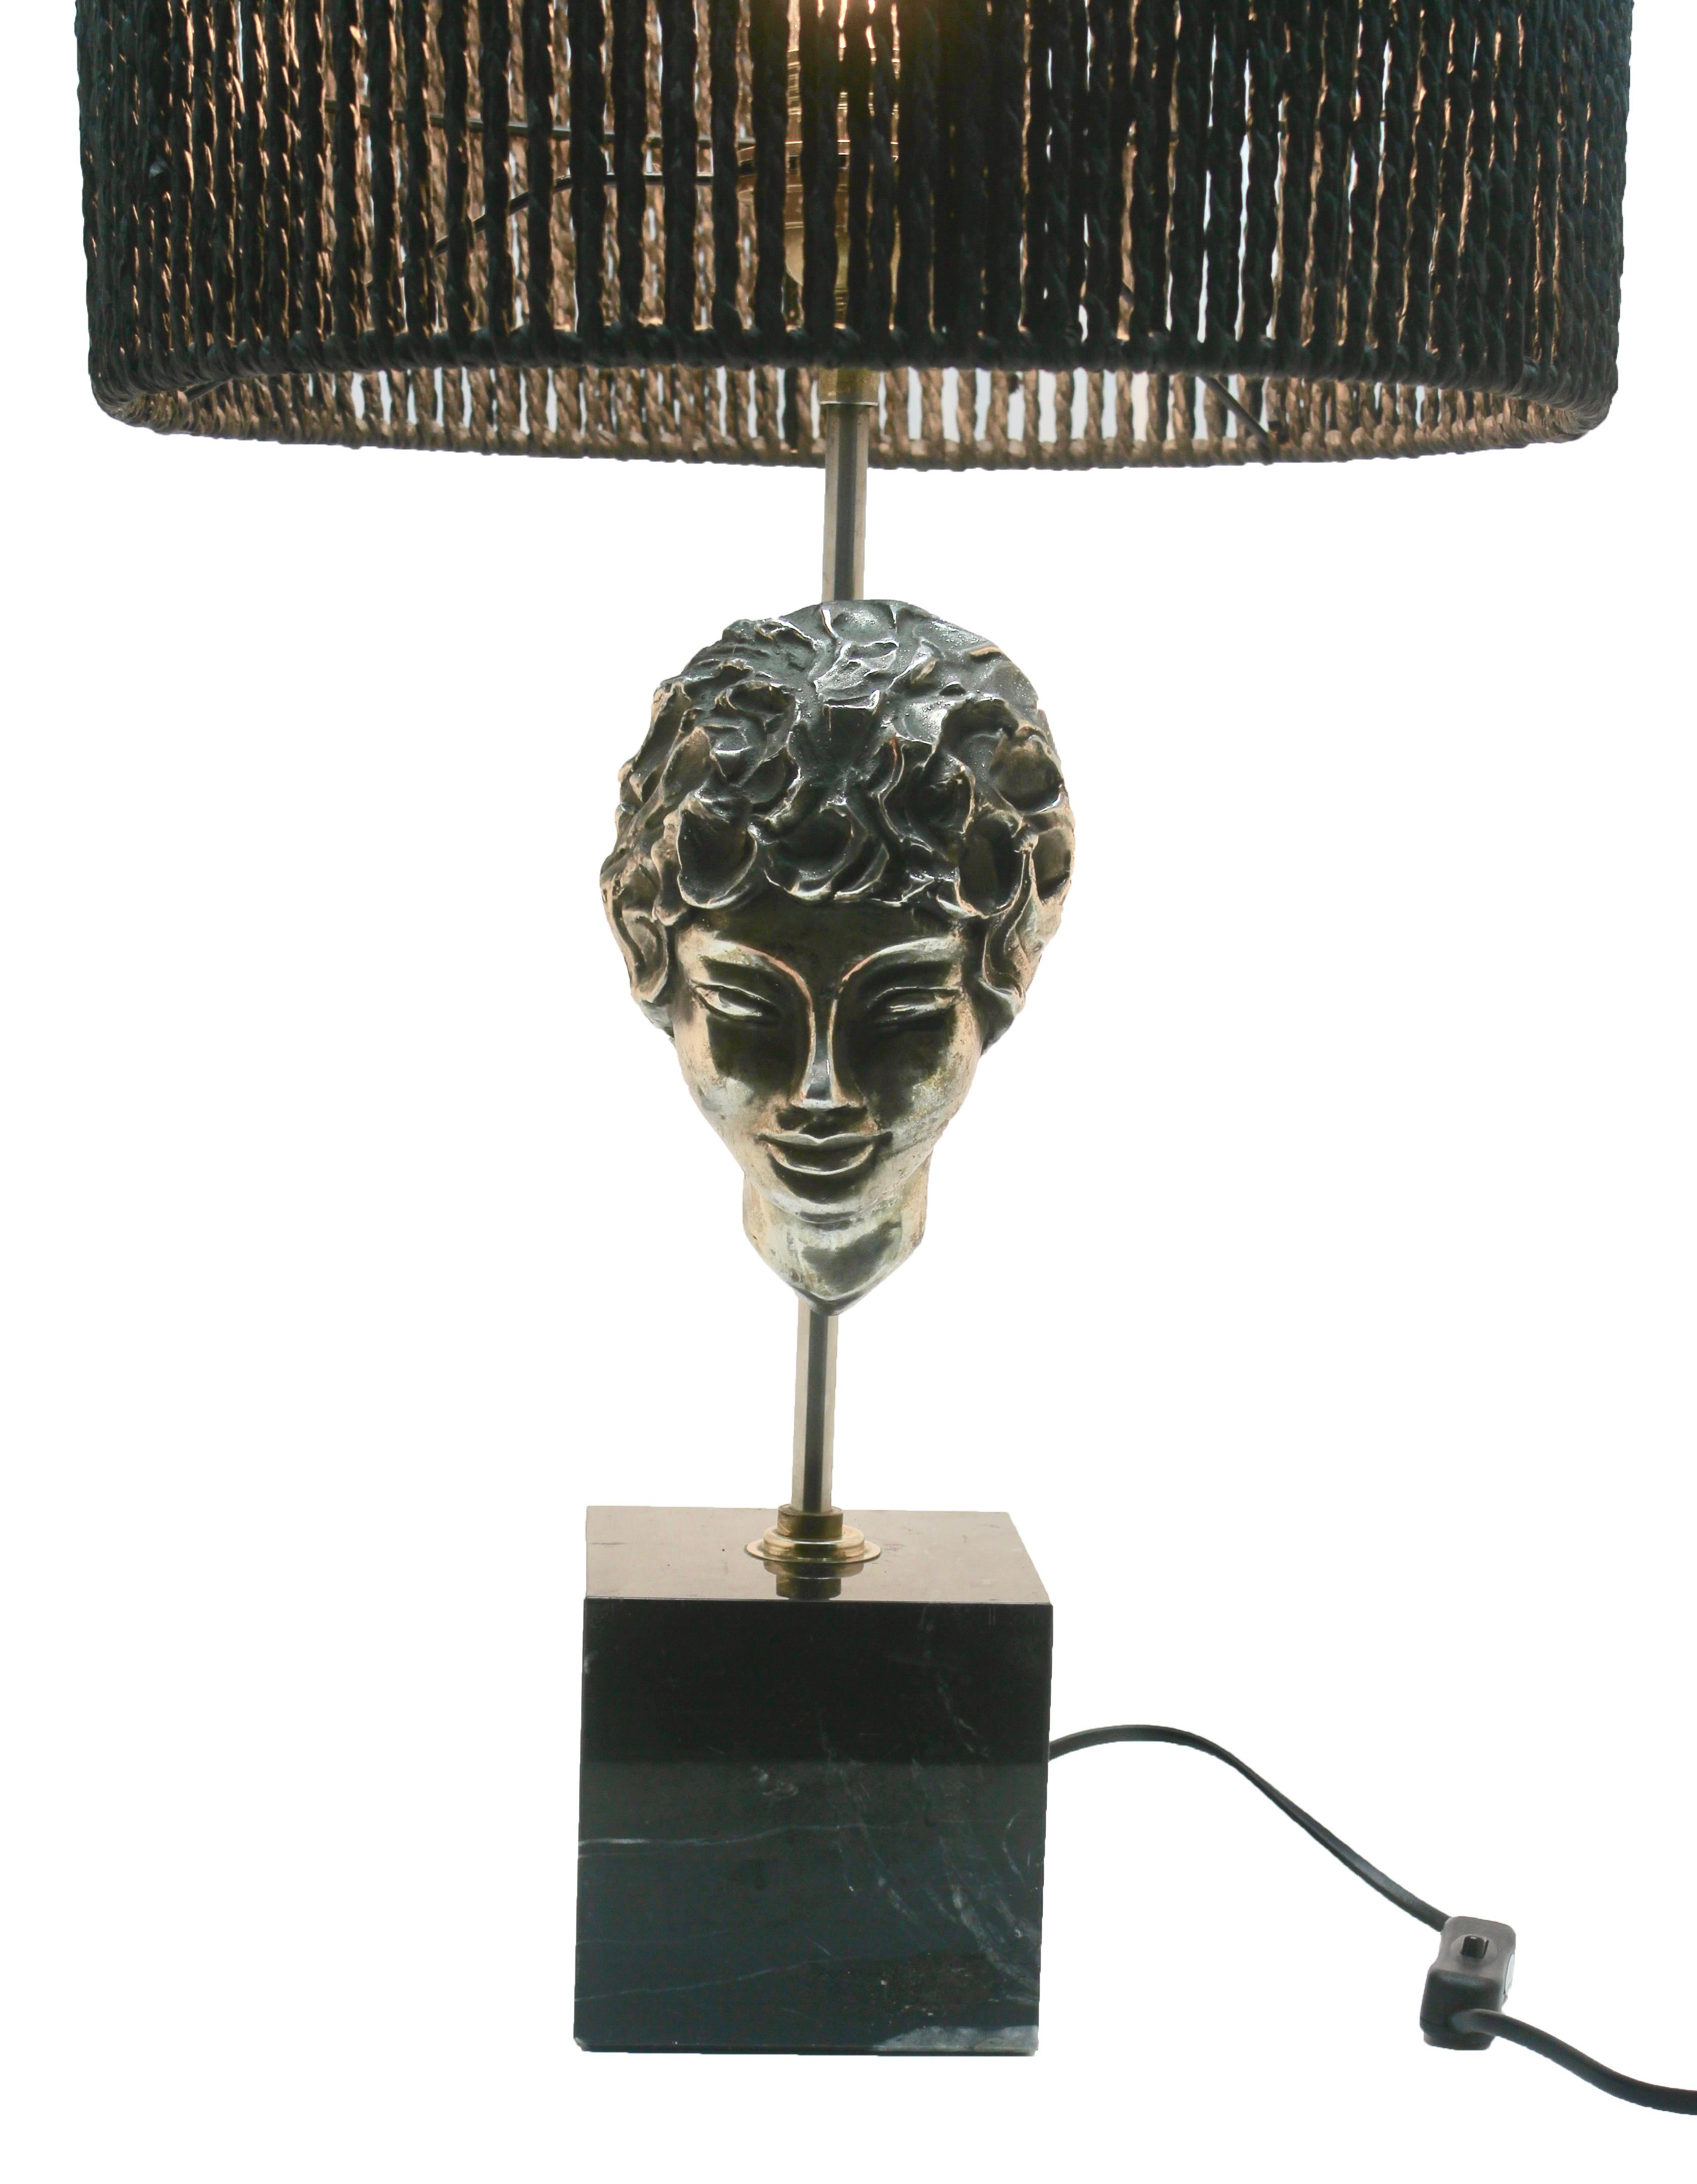 A nicely made table lamp with downlight that catches the facial features in a naturalistic way. 

Polished marble base with a chromed metal pillar supporting a flat-backed masque of a female head in silver-patinated bronze. Probably made during